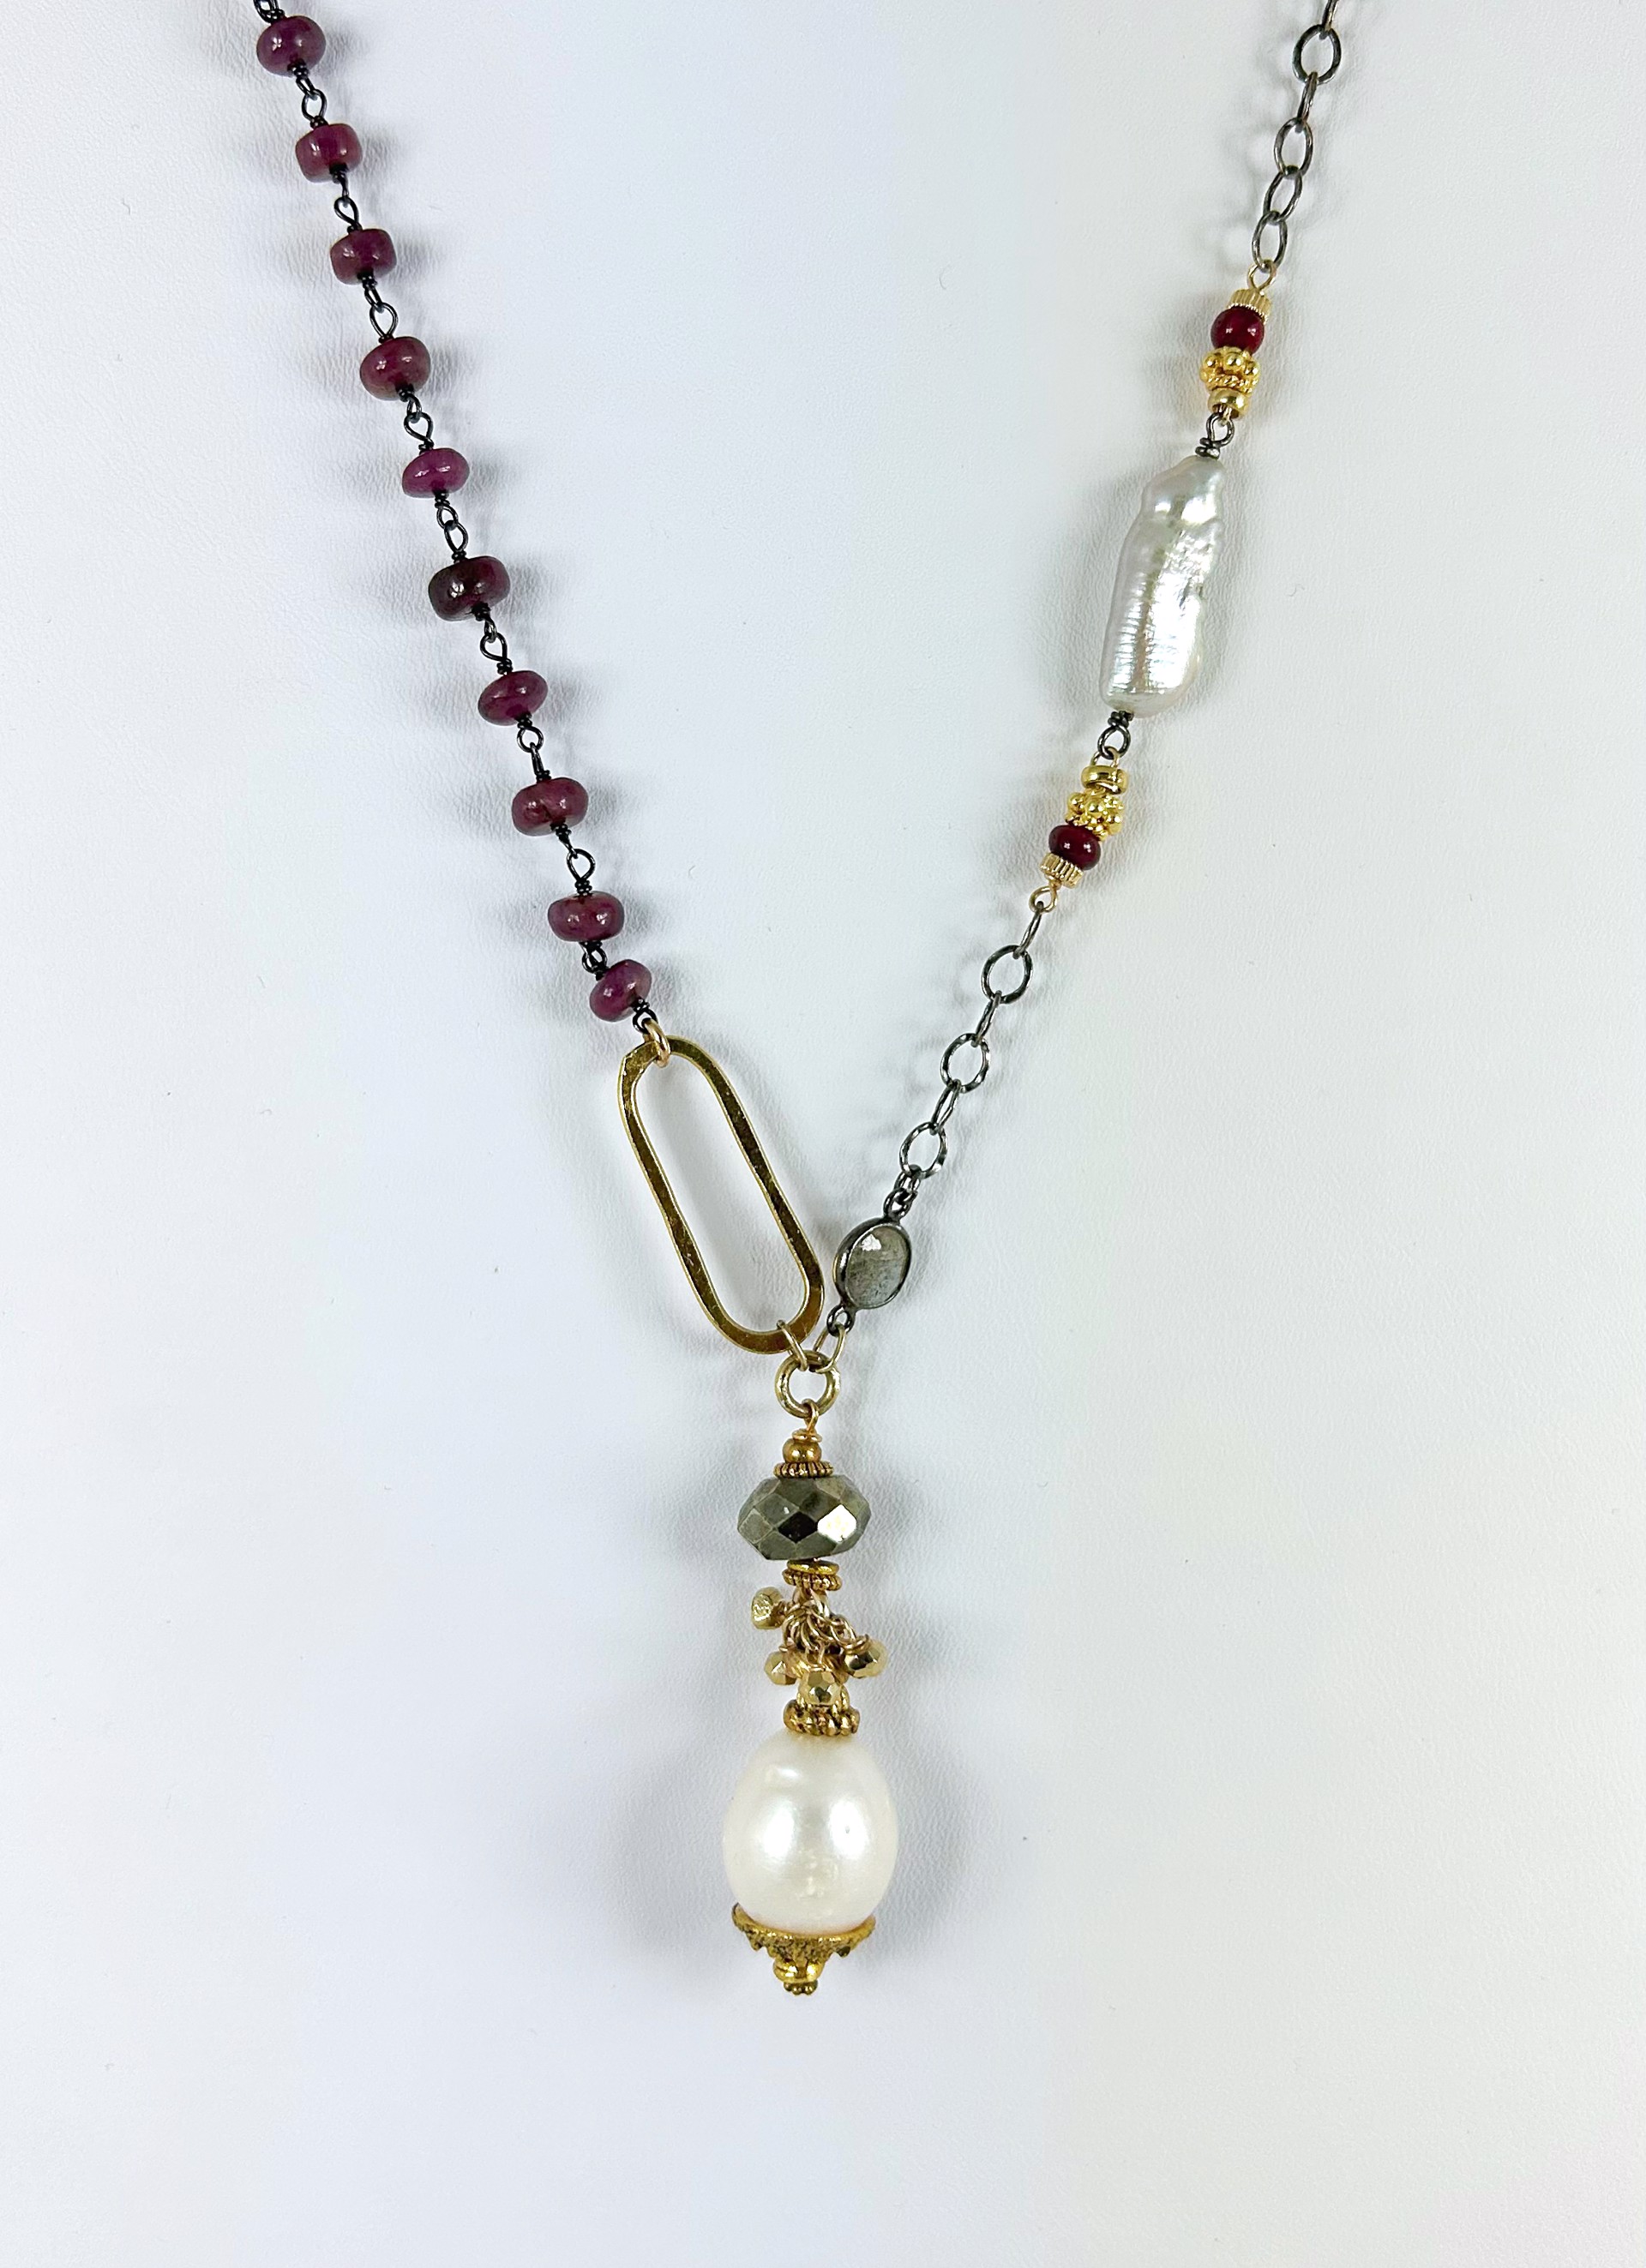 Ruby & pearl necklace by Jeri Mitrani